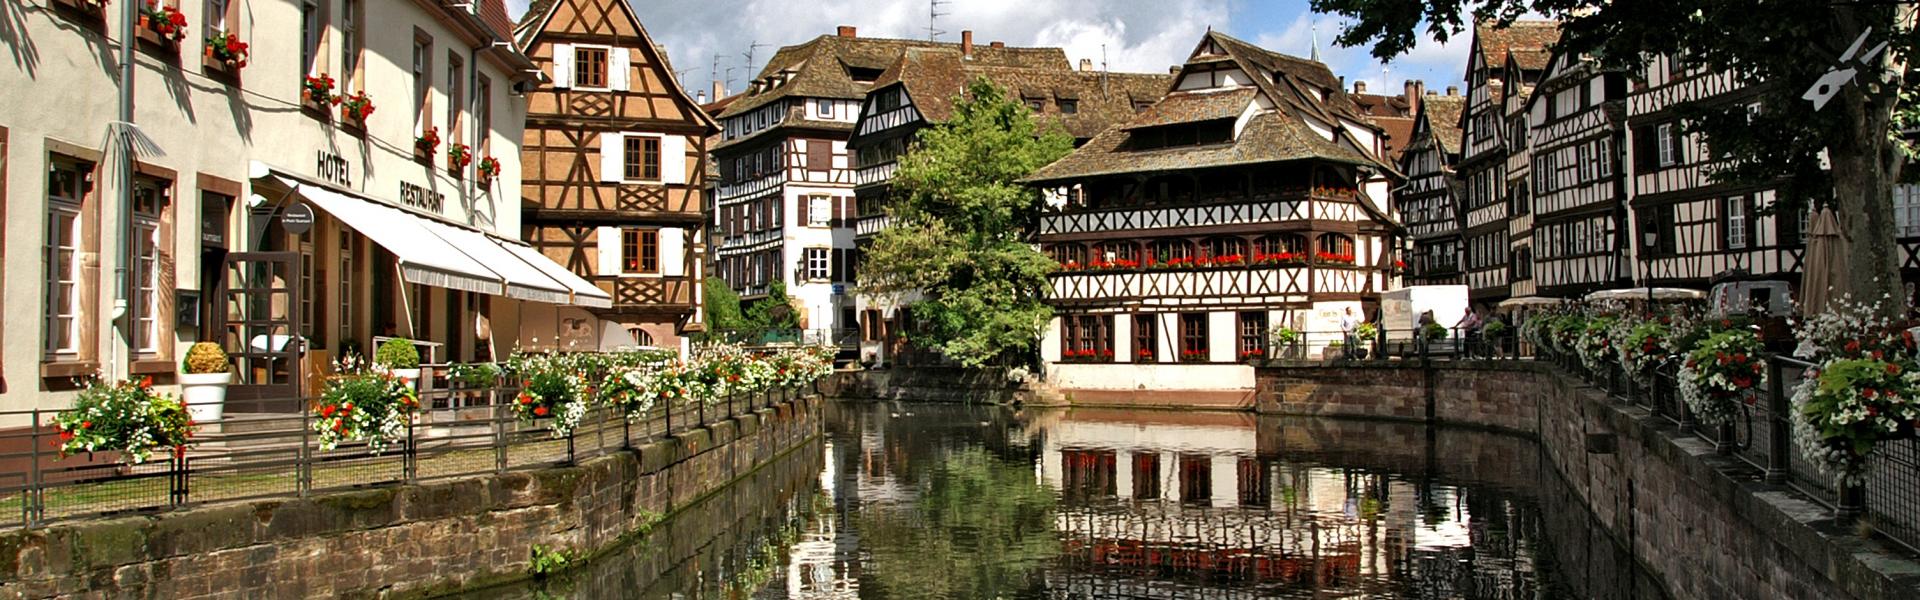 Find the perfect accommodation for your holiday in Alsace - Casamundo